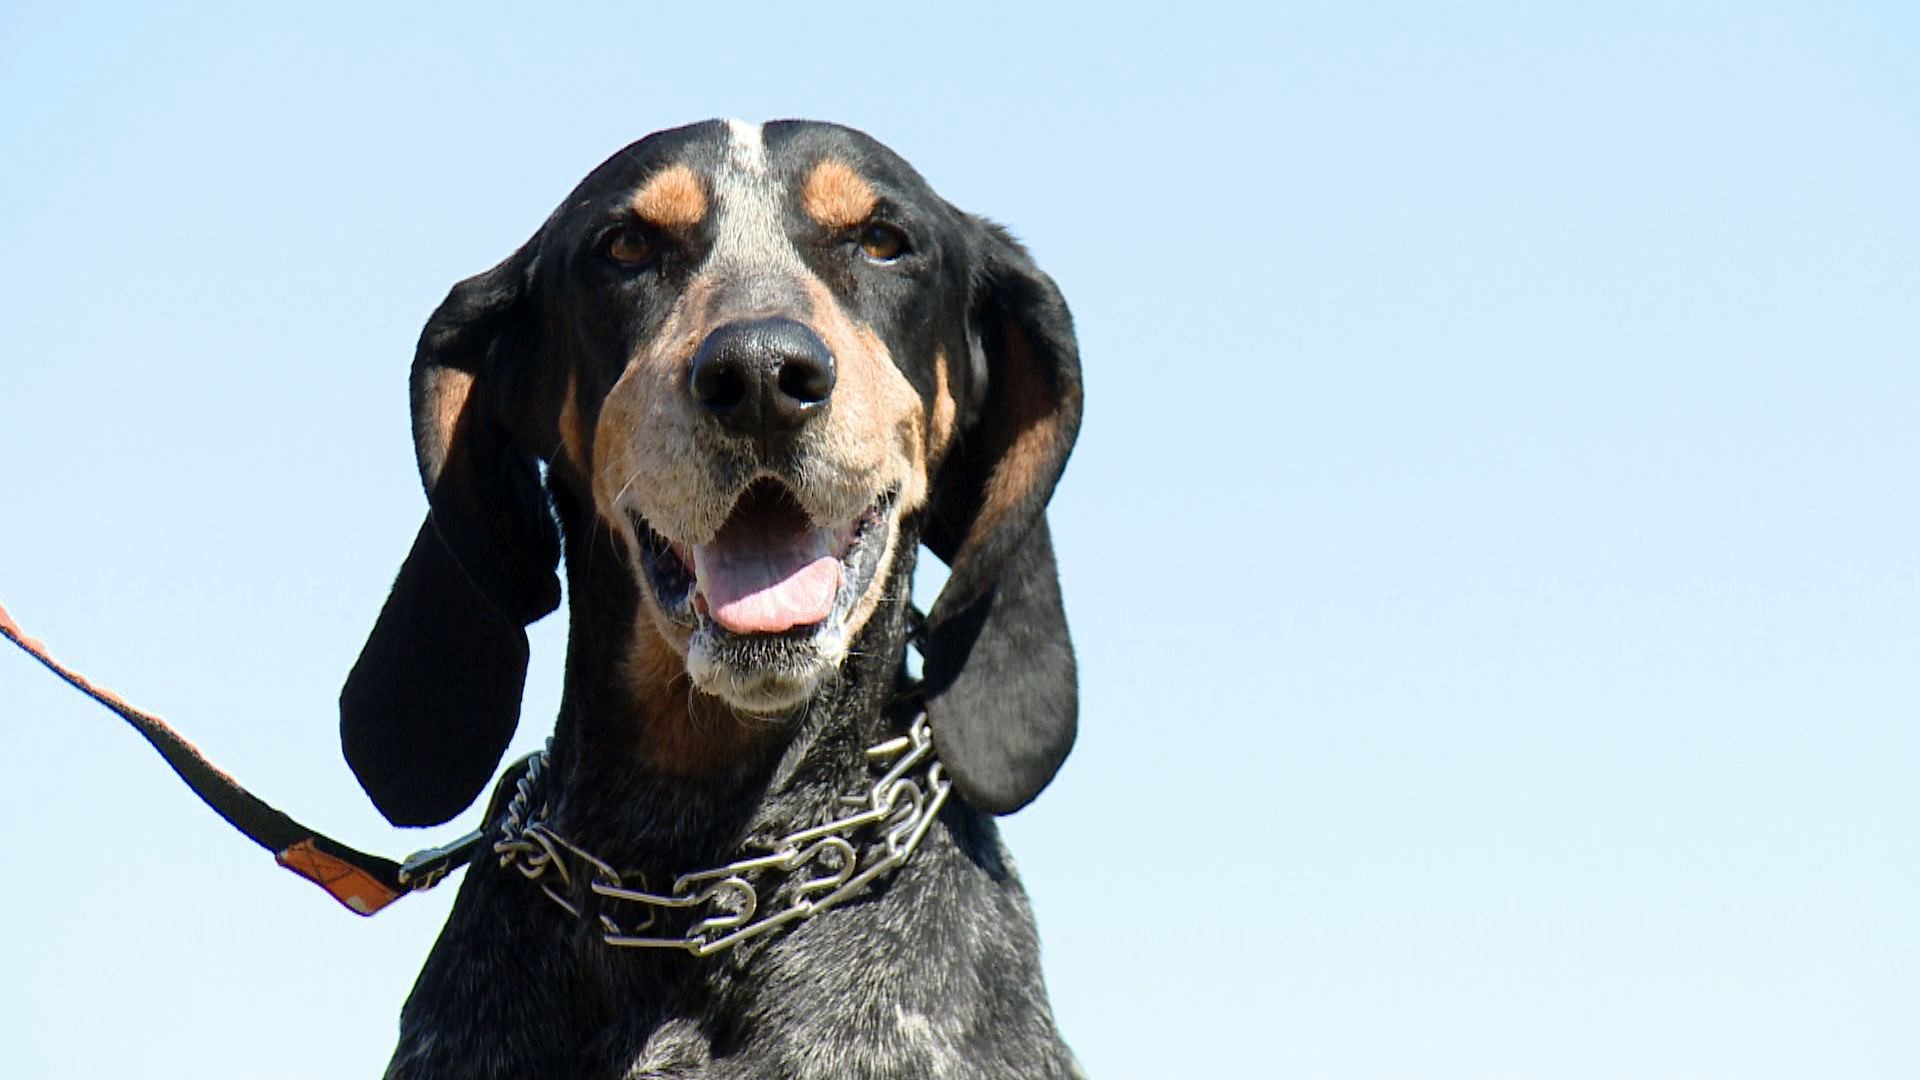 Smokey was already the beloved mascot of the University of Tennessee. We get reaction from the bluetick coonhound’s trainer now that the breed is the official state dog of Tennessee.